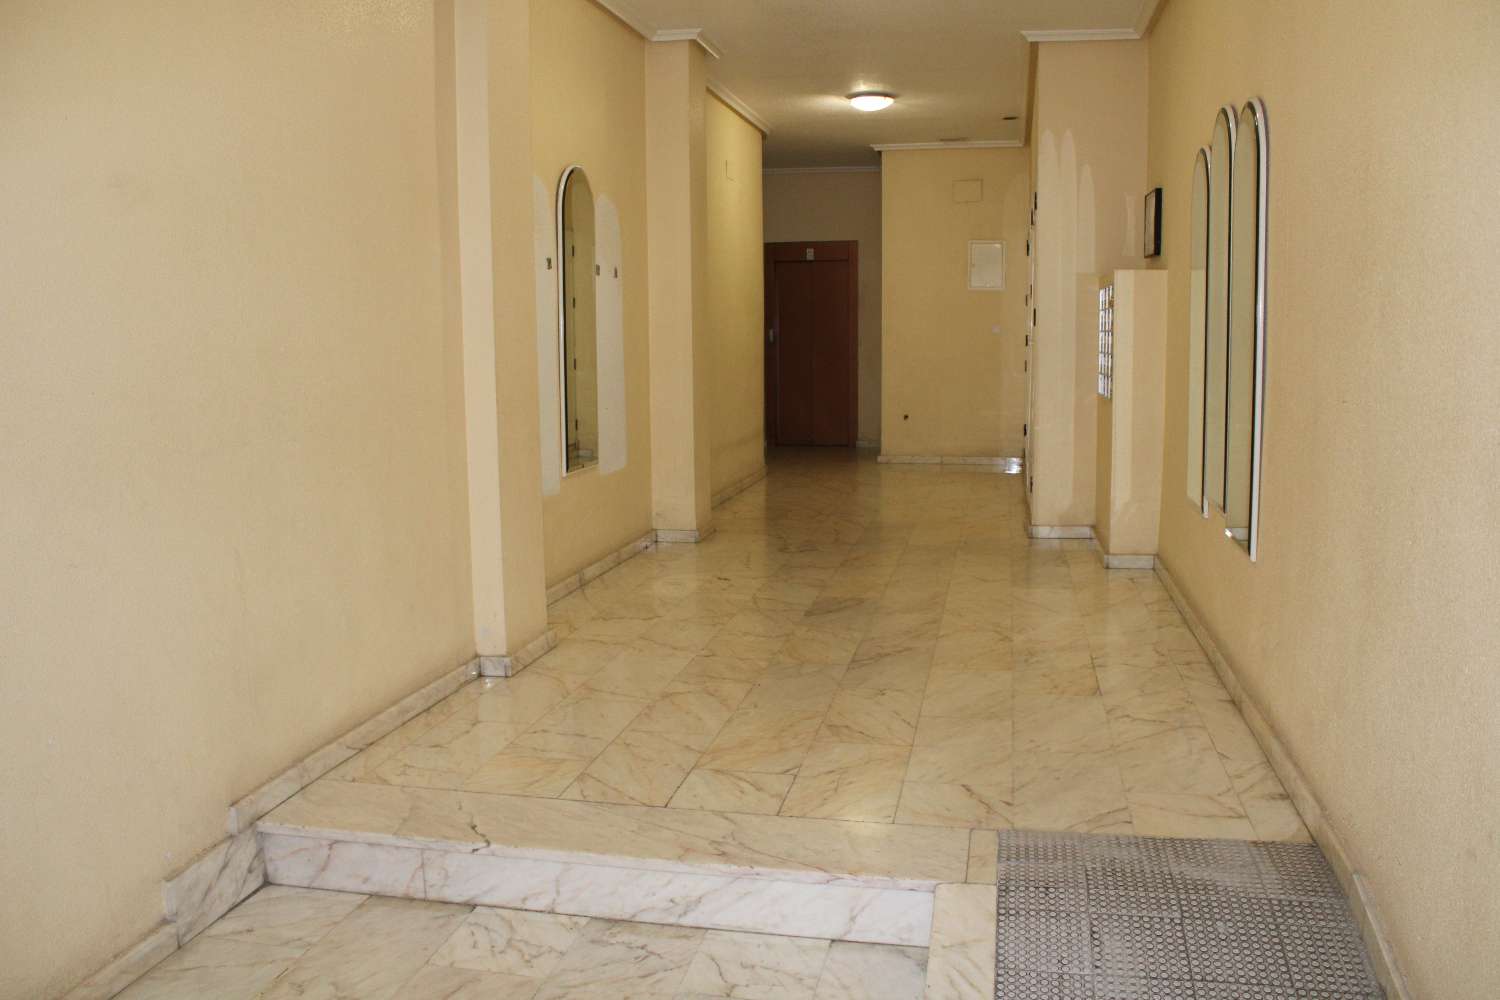 MAKE YOUR OFFER!! 3 BEDROOM 2 BATHROOM APARTMENT IN THE CENTER OF TORREVIEJA!